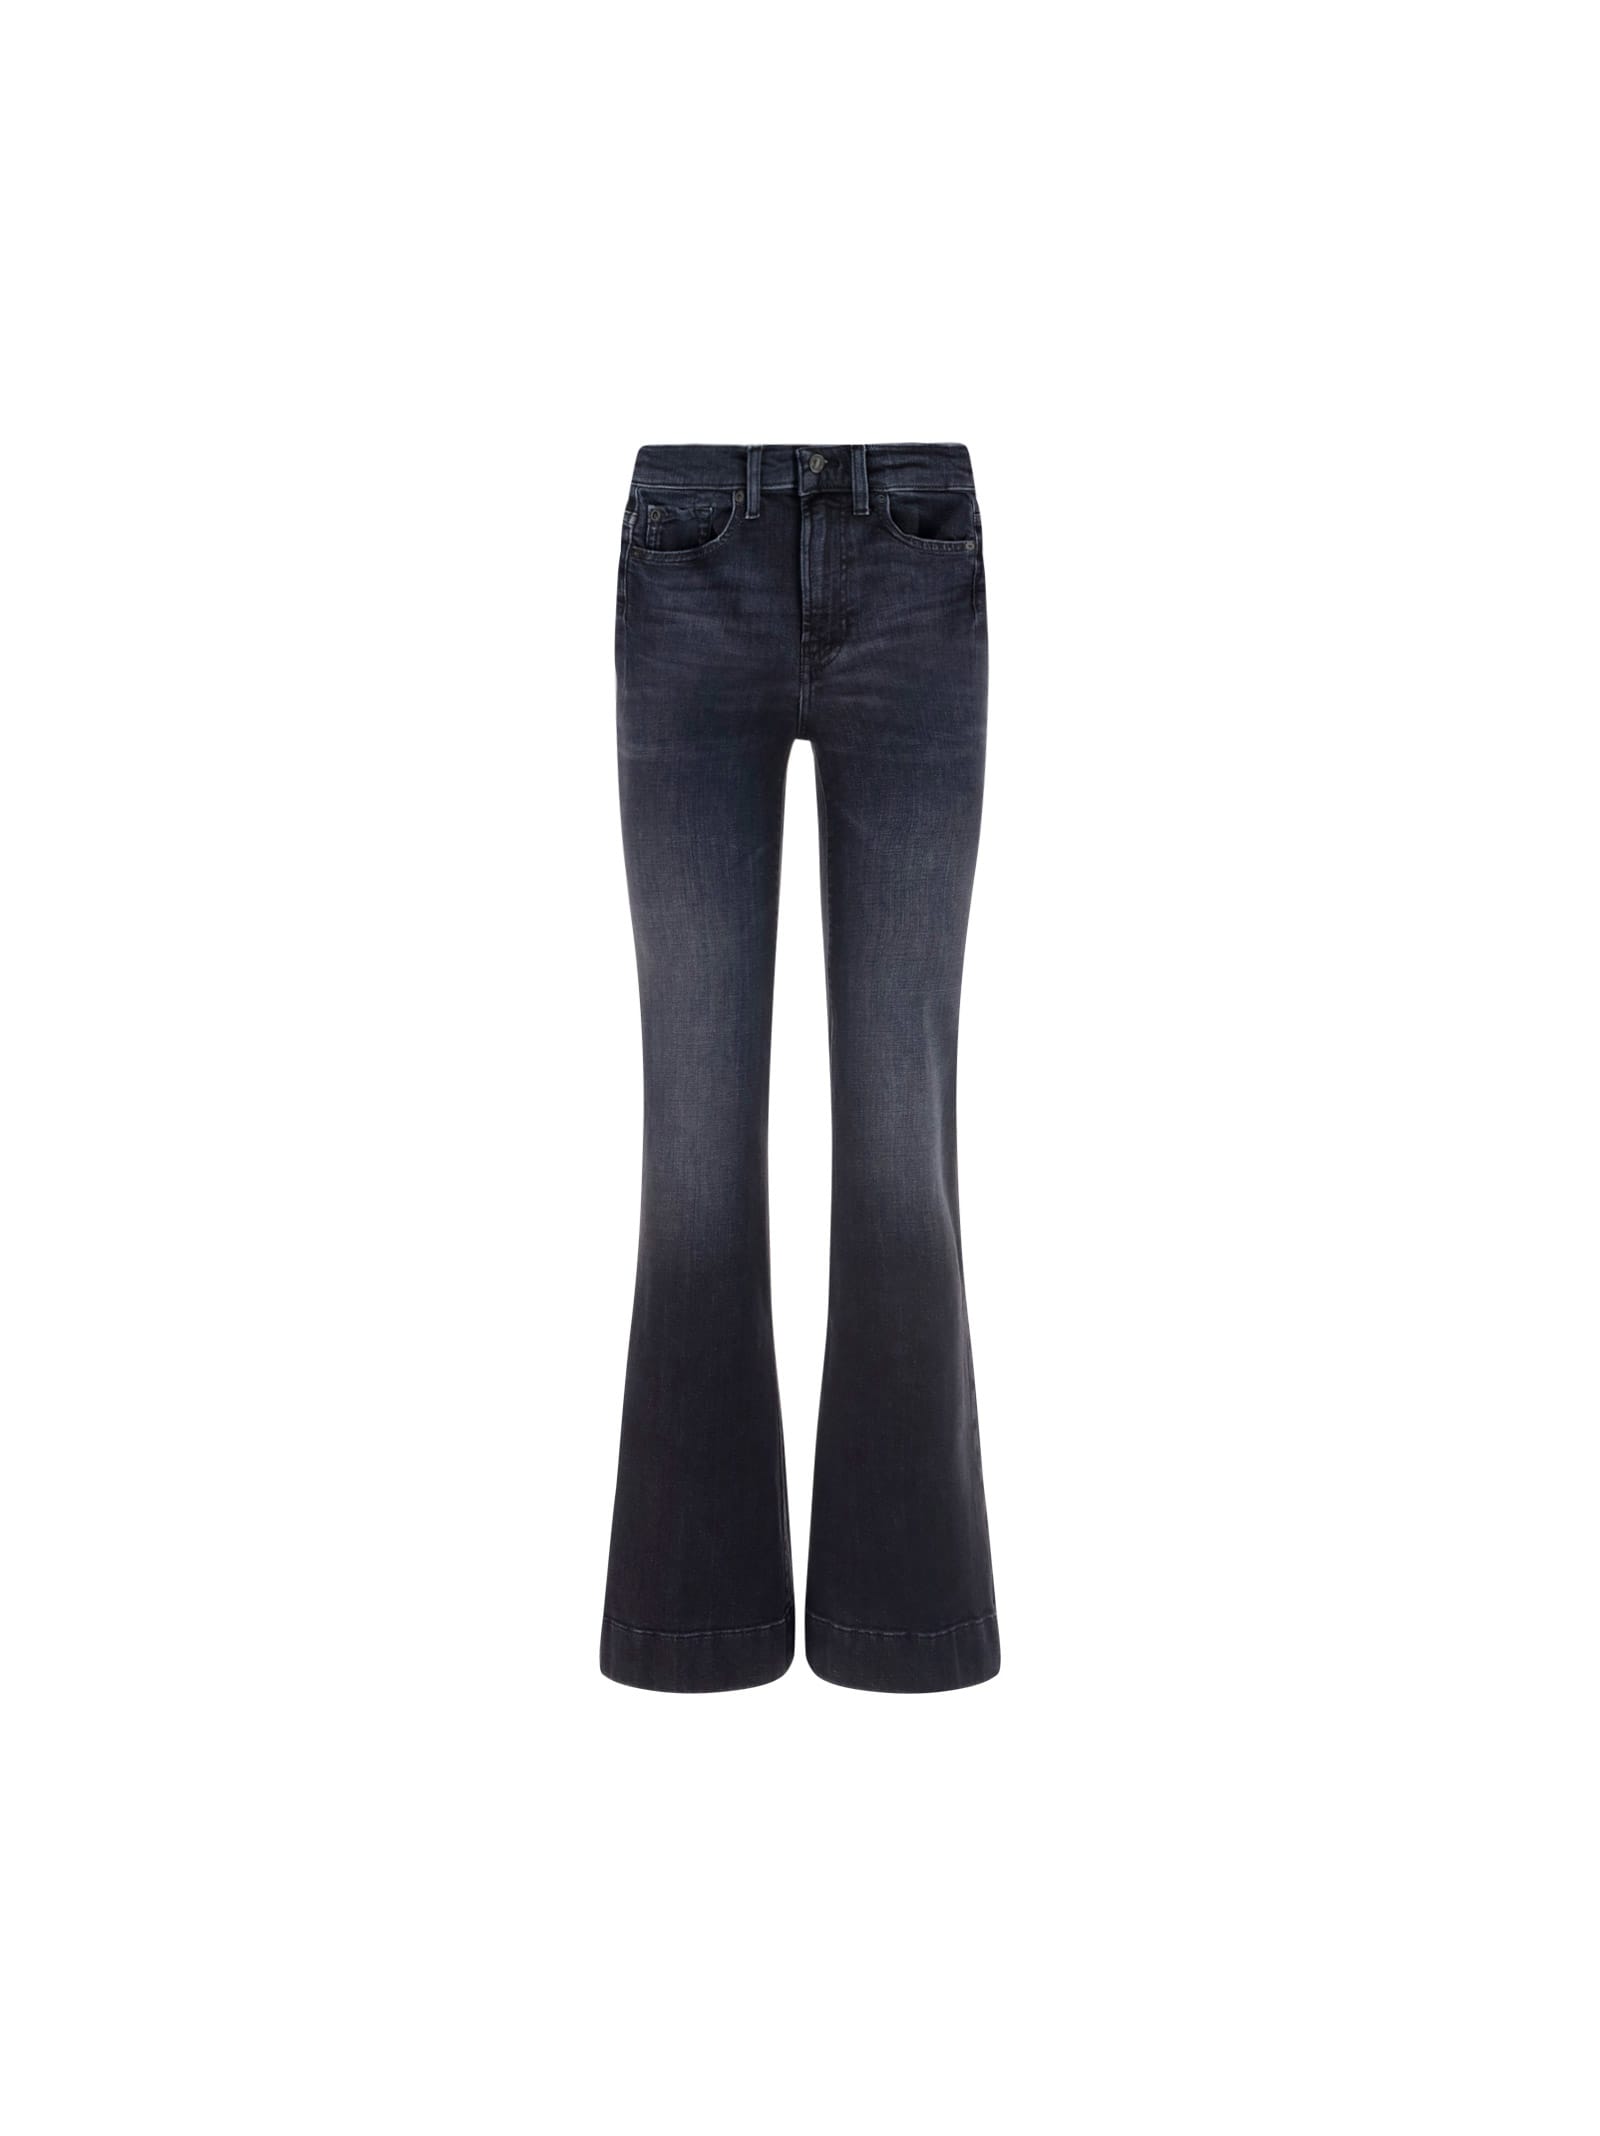 7 For All Mankind Modern Dojo Savage Jeans